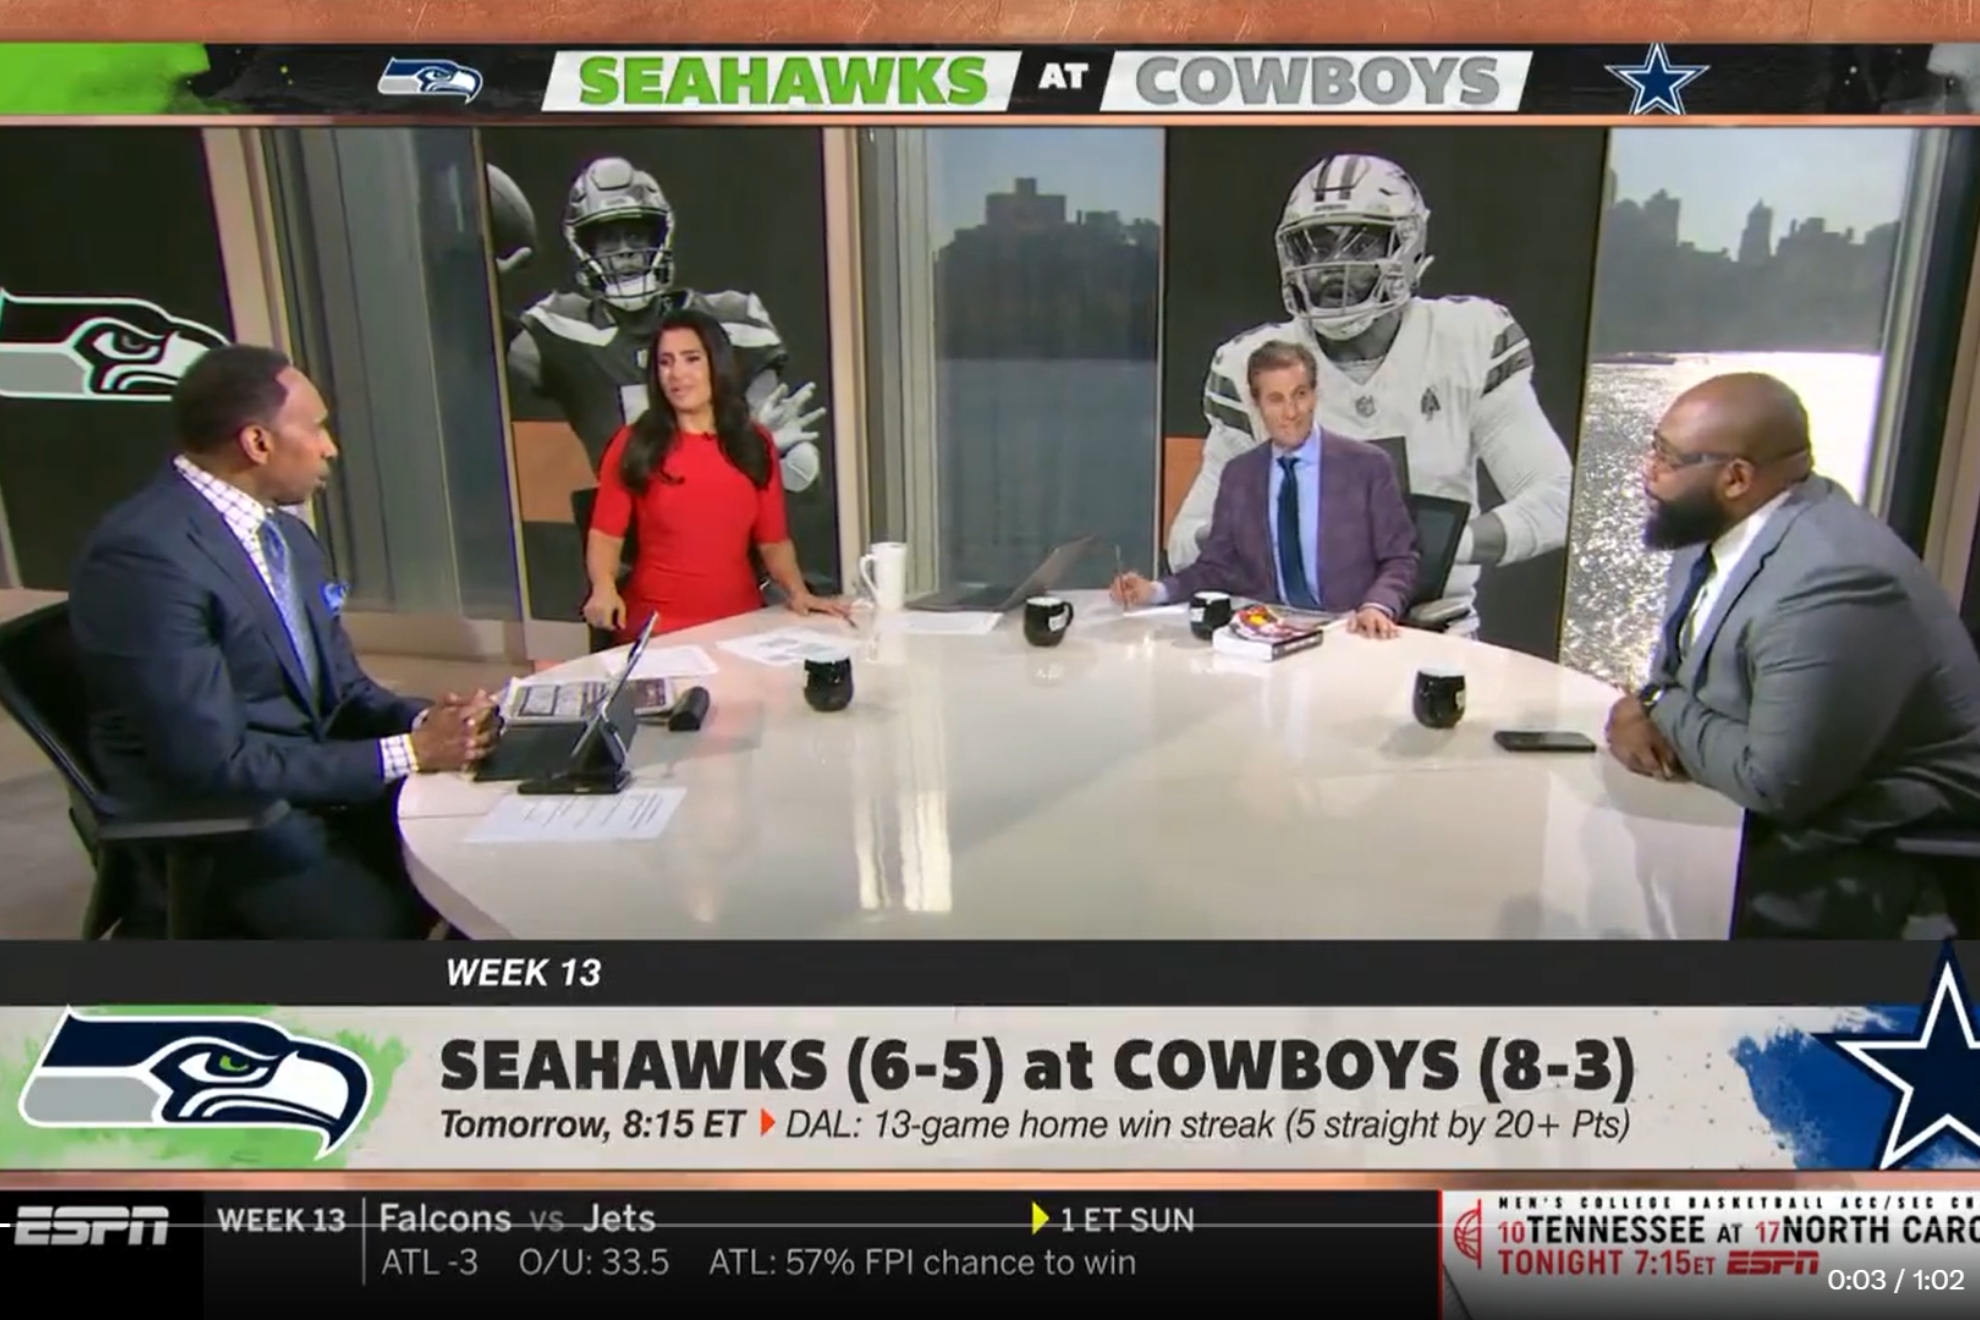 This isnt the first time Stephen A and Molly Qerim have had on-air tension